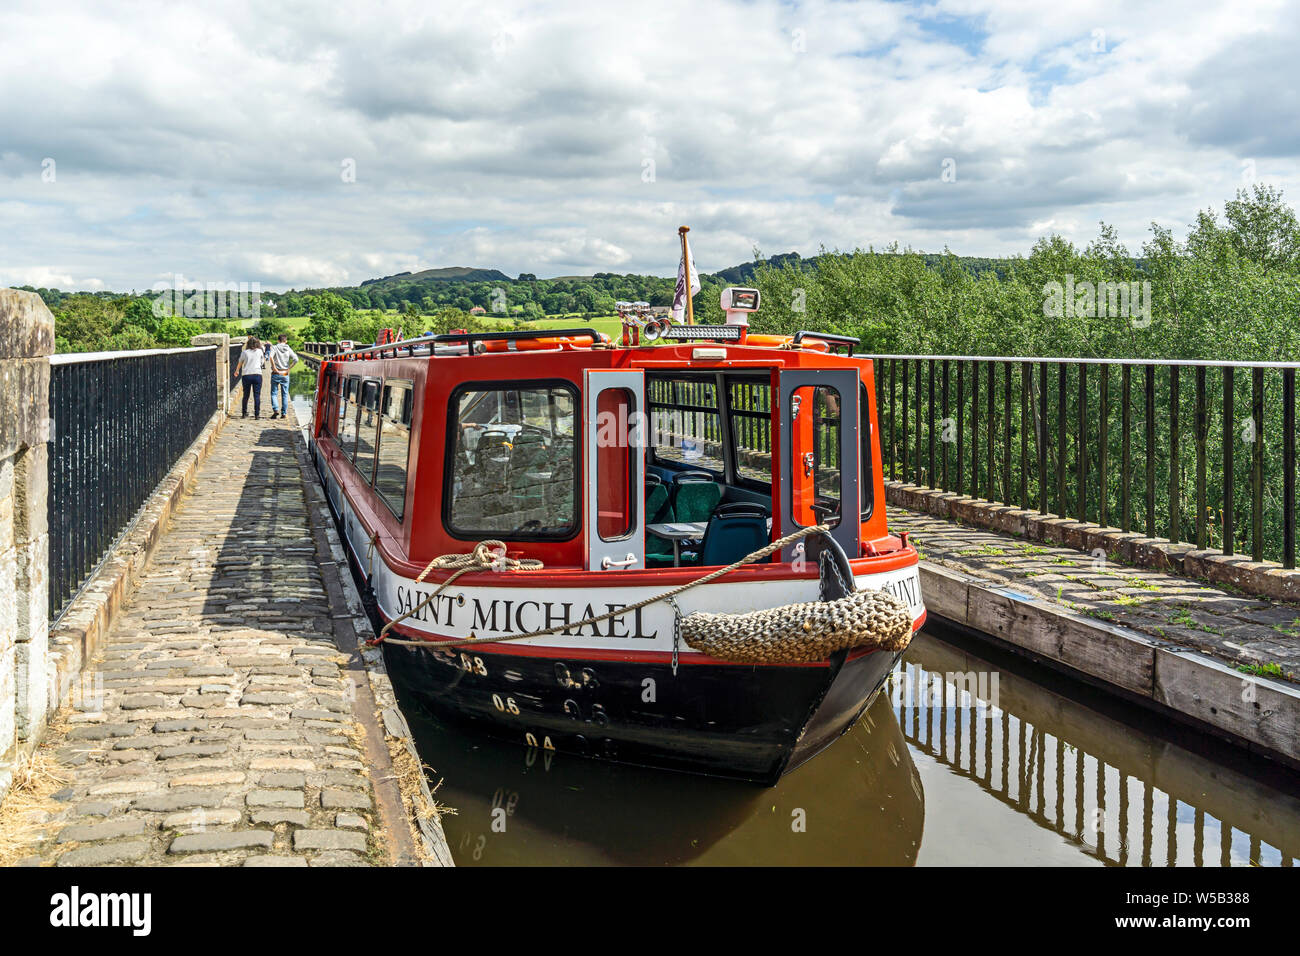 New Linlithgow Union Canal Society cruise canal boat Saint Michael moored on the Avon Viaduct in The Union Canal Linlithgow West Lothian Scotland UK Stock Photo